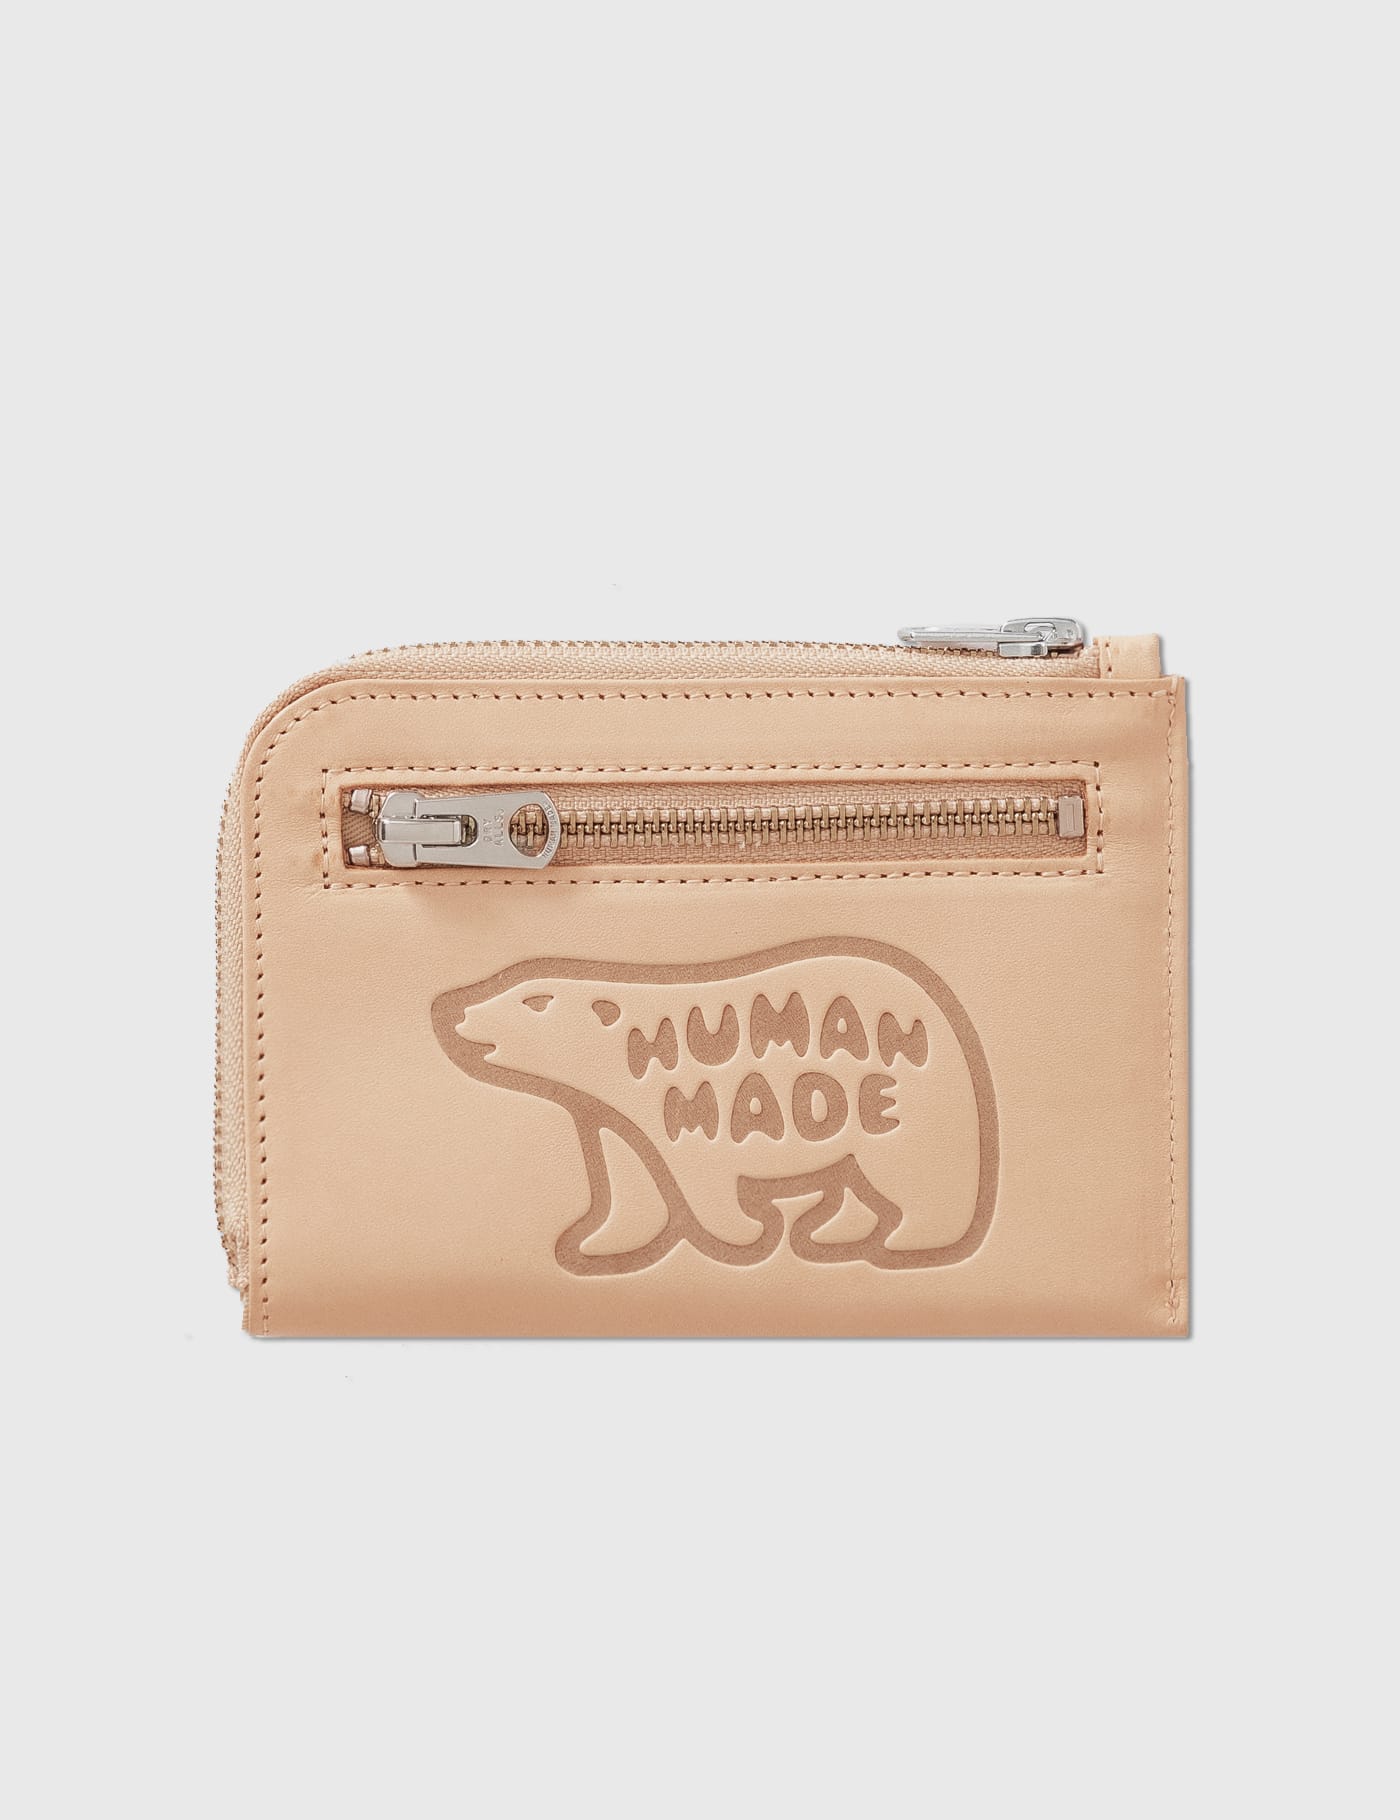 Human Made - Leather Wallet | HBX - Globally Curated Fashion and